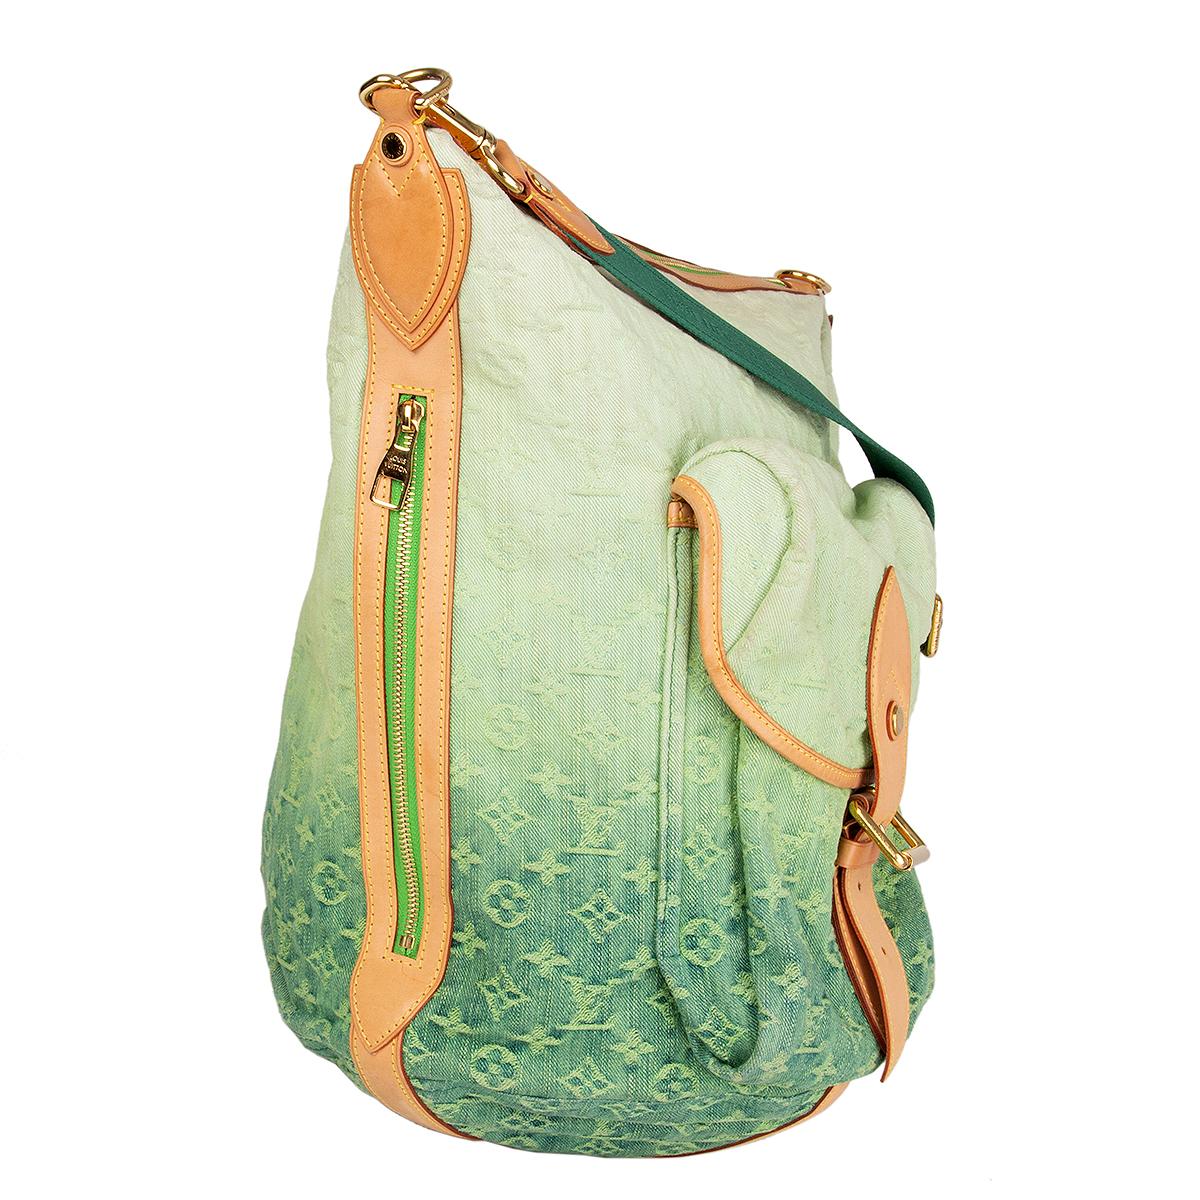 Louis Vuitton 'Sunburst PM' shoulder bag in gradient green Monogram Denim featuring natural cowhide leather trimmings with detachable and adjsutable web shoulder strap. Limited edition bag from spring/summer 2010 runway. Outside pocket with buckle